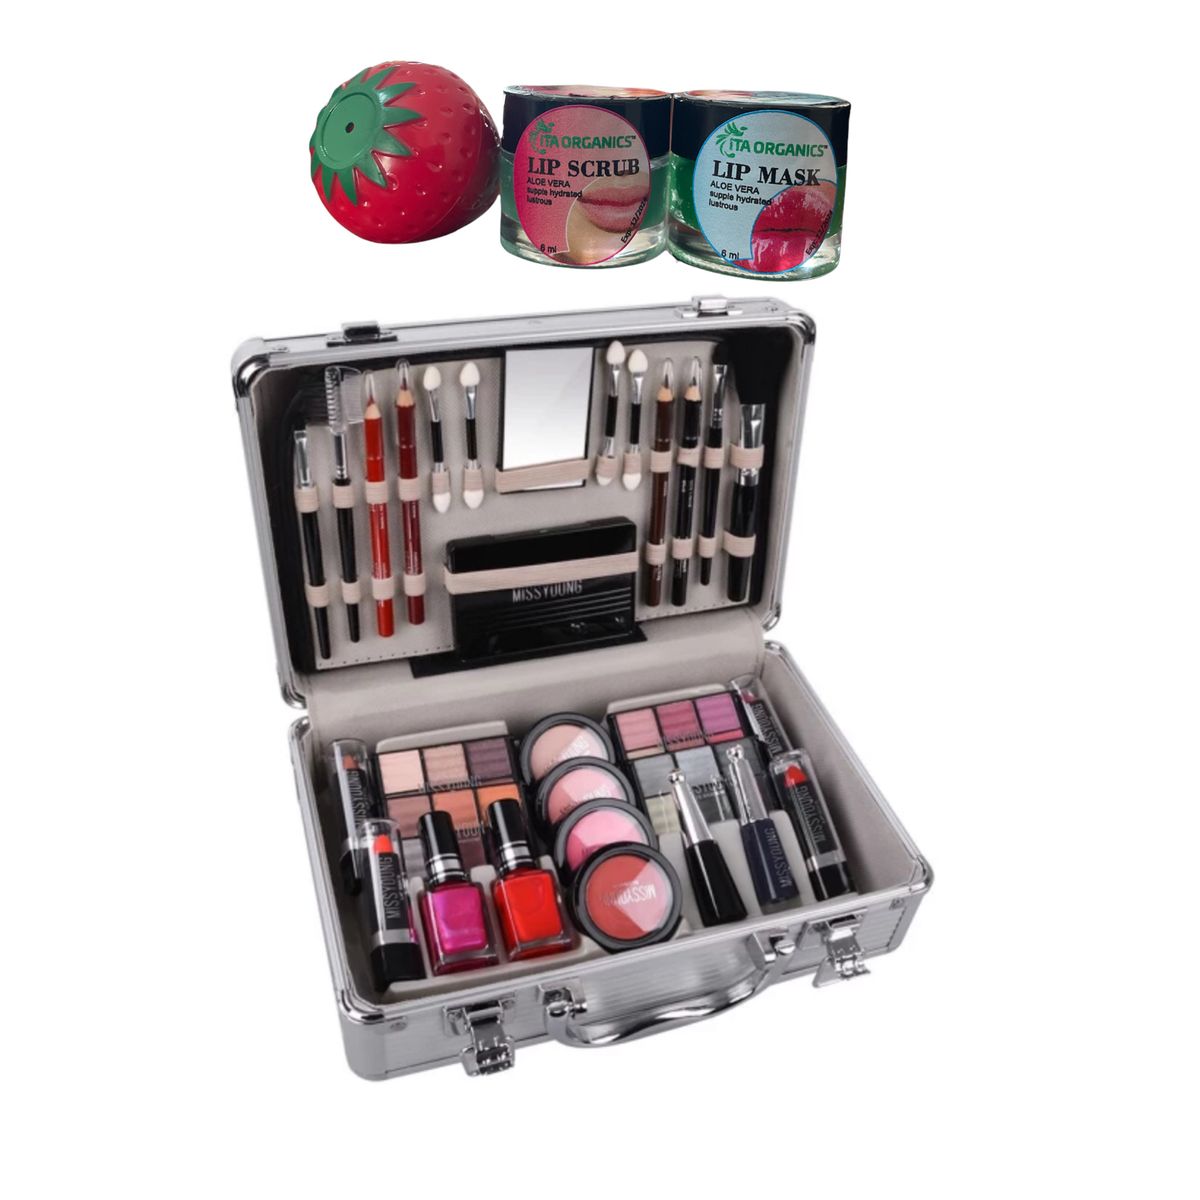 Miss Young Complete Makeup Kit - MC1157 Complete Lips Care Kit | Buy Online in Africa | takealot.com